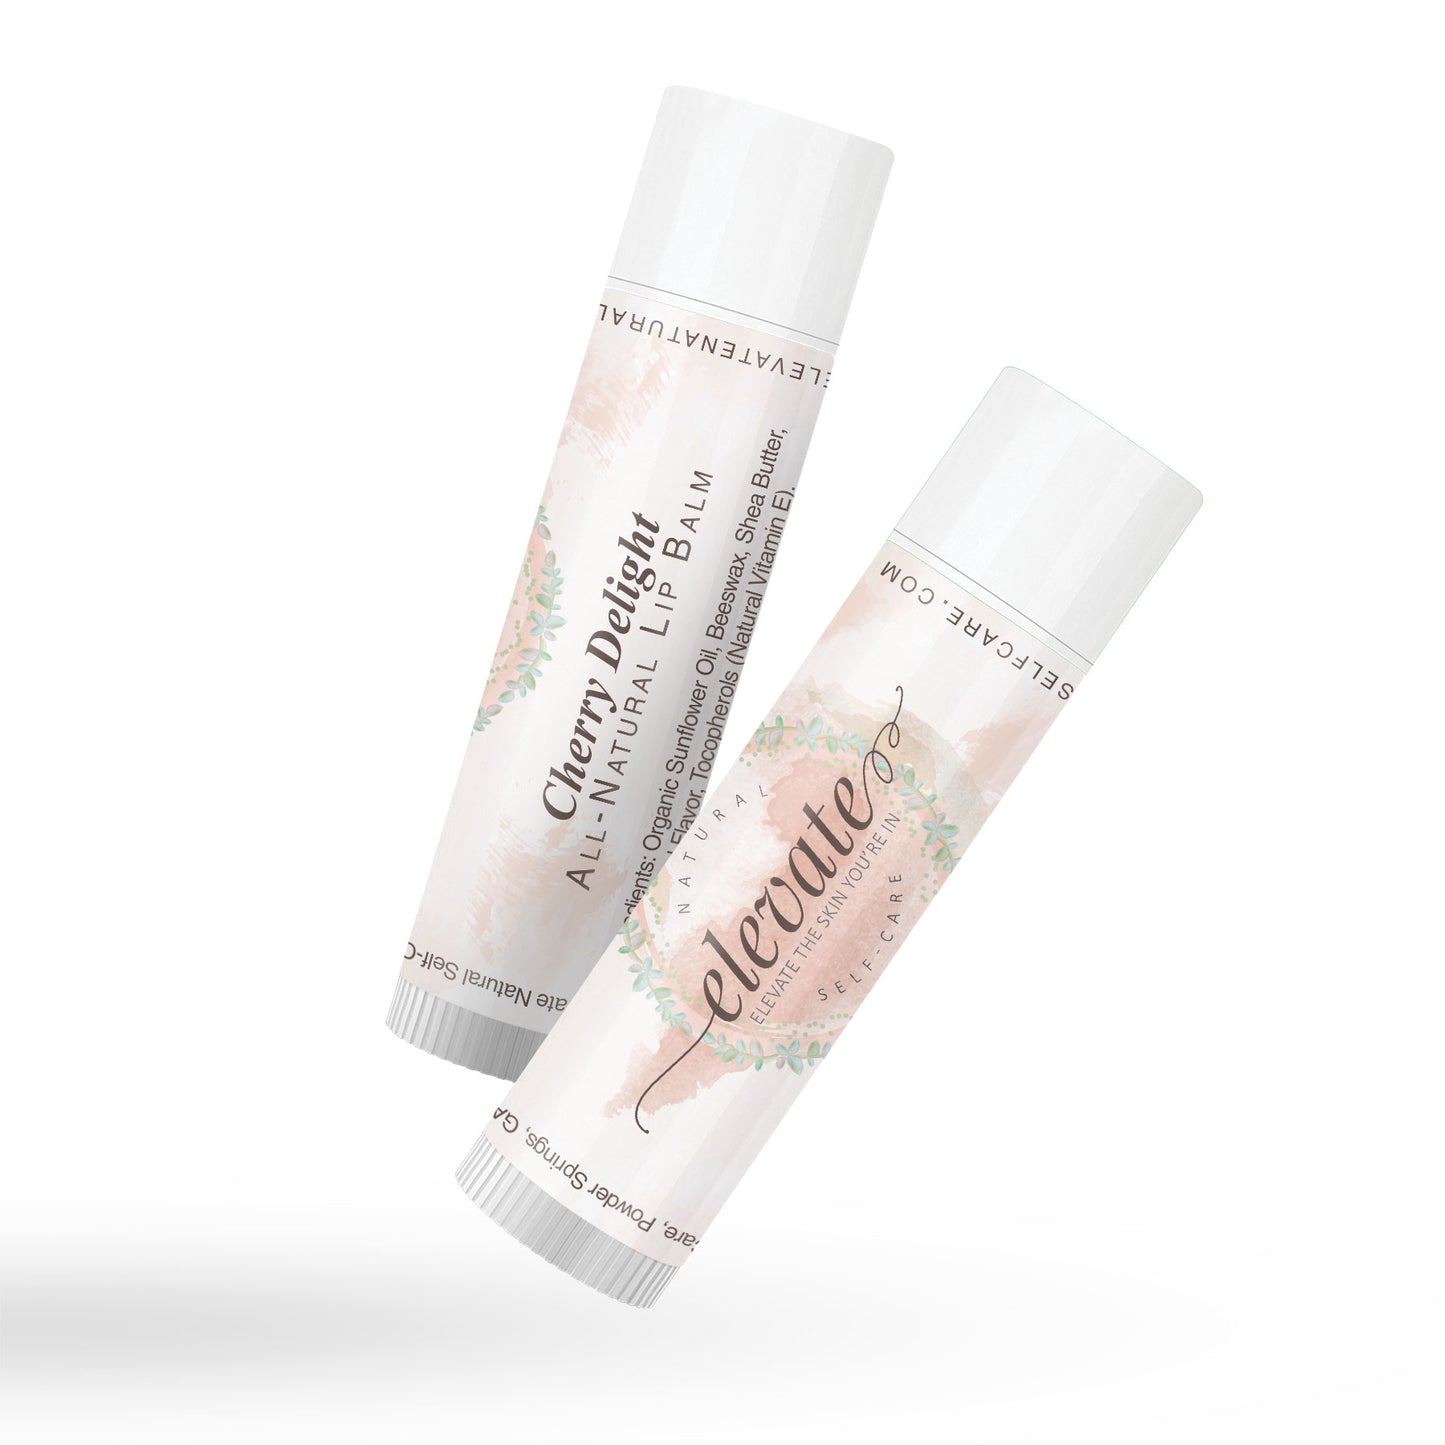 Cherry Delight All-Natural Lip Balm will naturally revitalize lips with our long-lasting conditioning lip balm made with sustainable and locally sourced beeswax, moisturizing shea butter, sunflower oil, and vitamin E oil with a delightfully natural cherry-scented flavor oil. 